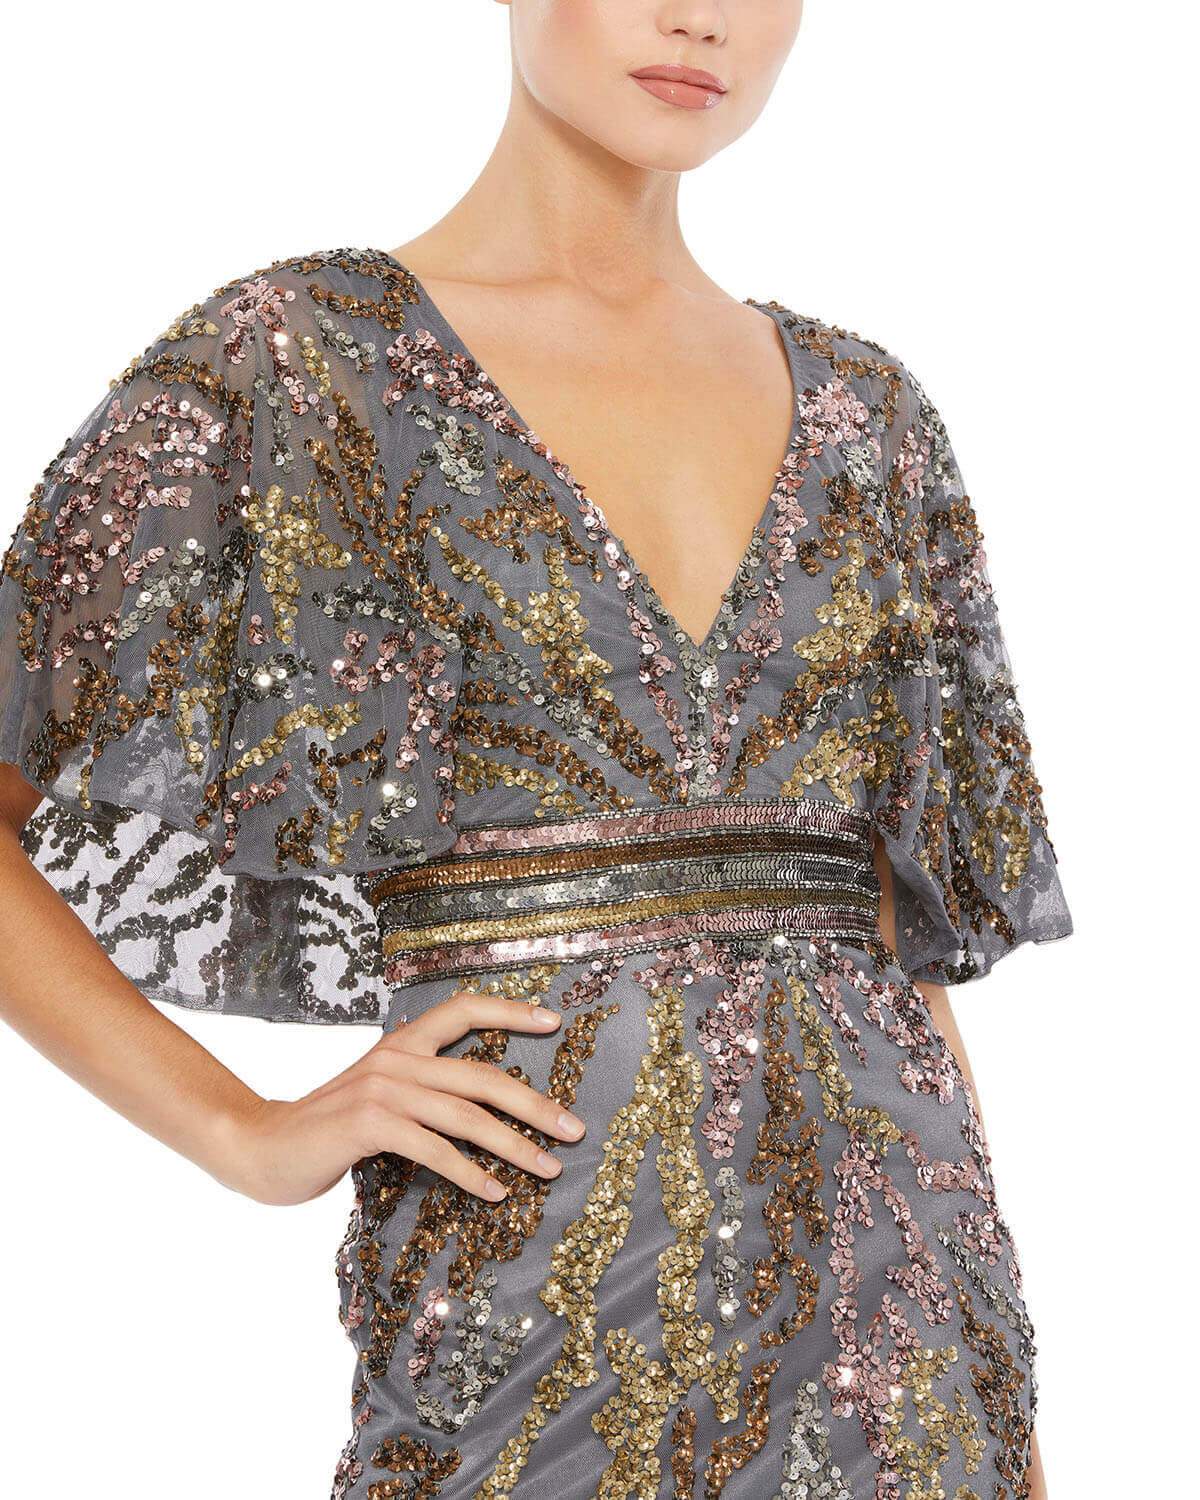 This striking evening gown features a low v-neckline, sequin-belted empire waist, short bell sleeves, and a cape-style back. The gown's mesh overlay is ornately embellished with abstractly-patterned sequins. Mac Duggal Fully Lined 100% Polyester V-Neck Sh